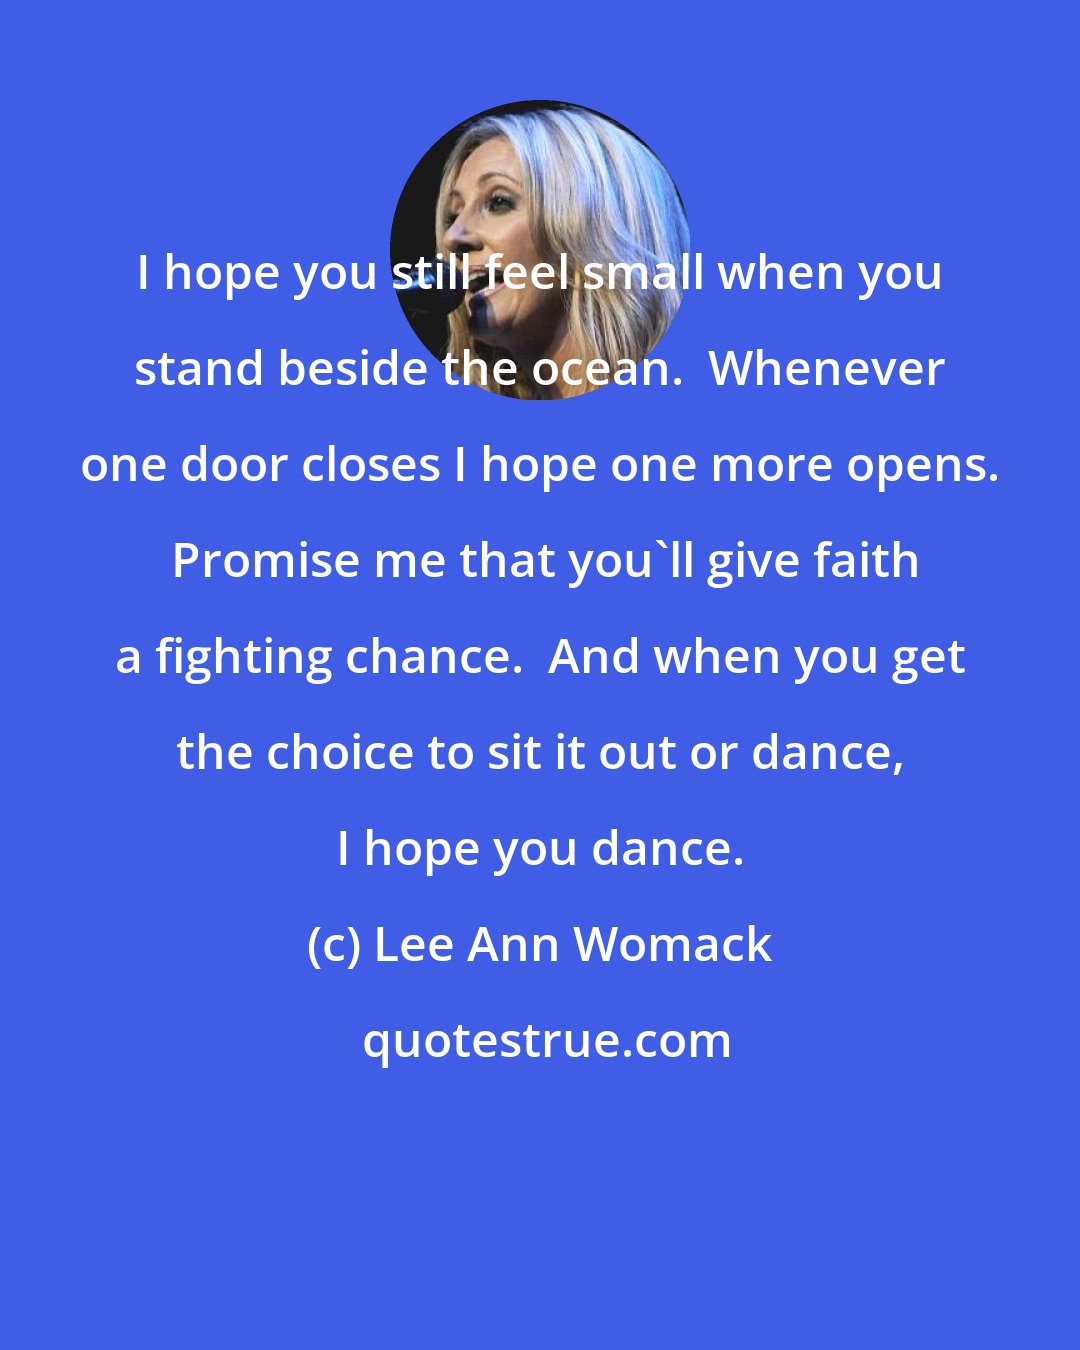 Lee Ann Womack: I hope you still feel small when you stand beside the ocean.  Whenever one door closes I hope one more opens.  Promise me that you'll give faith a fighting chance.  And when you get the choice to sit it out or dance, I hope you dance.